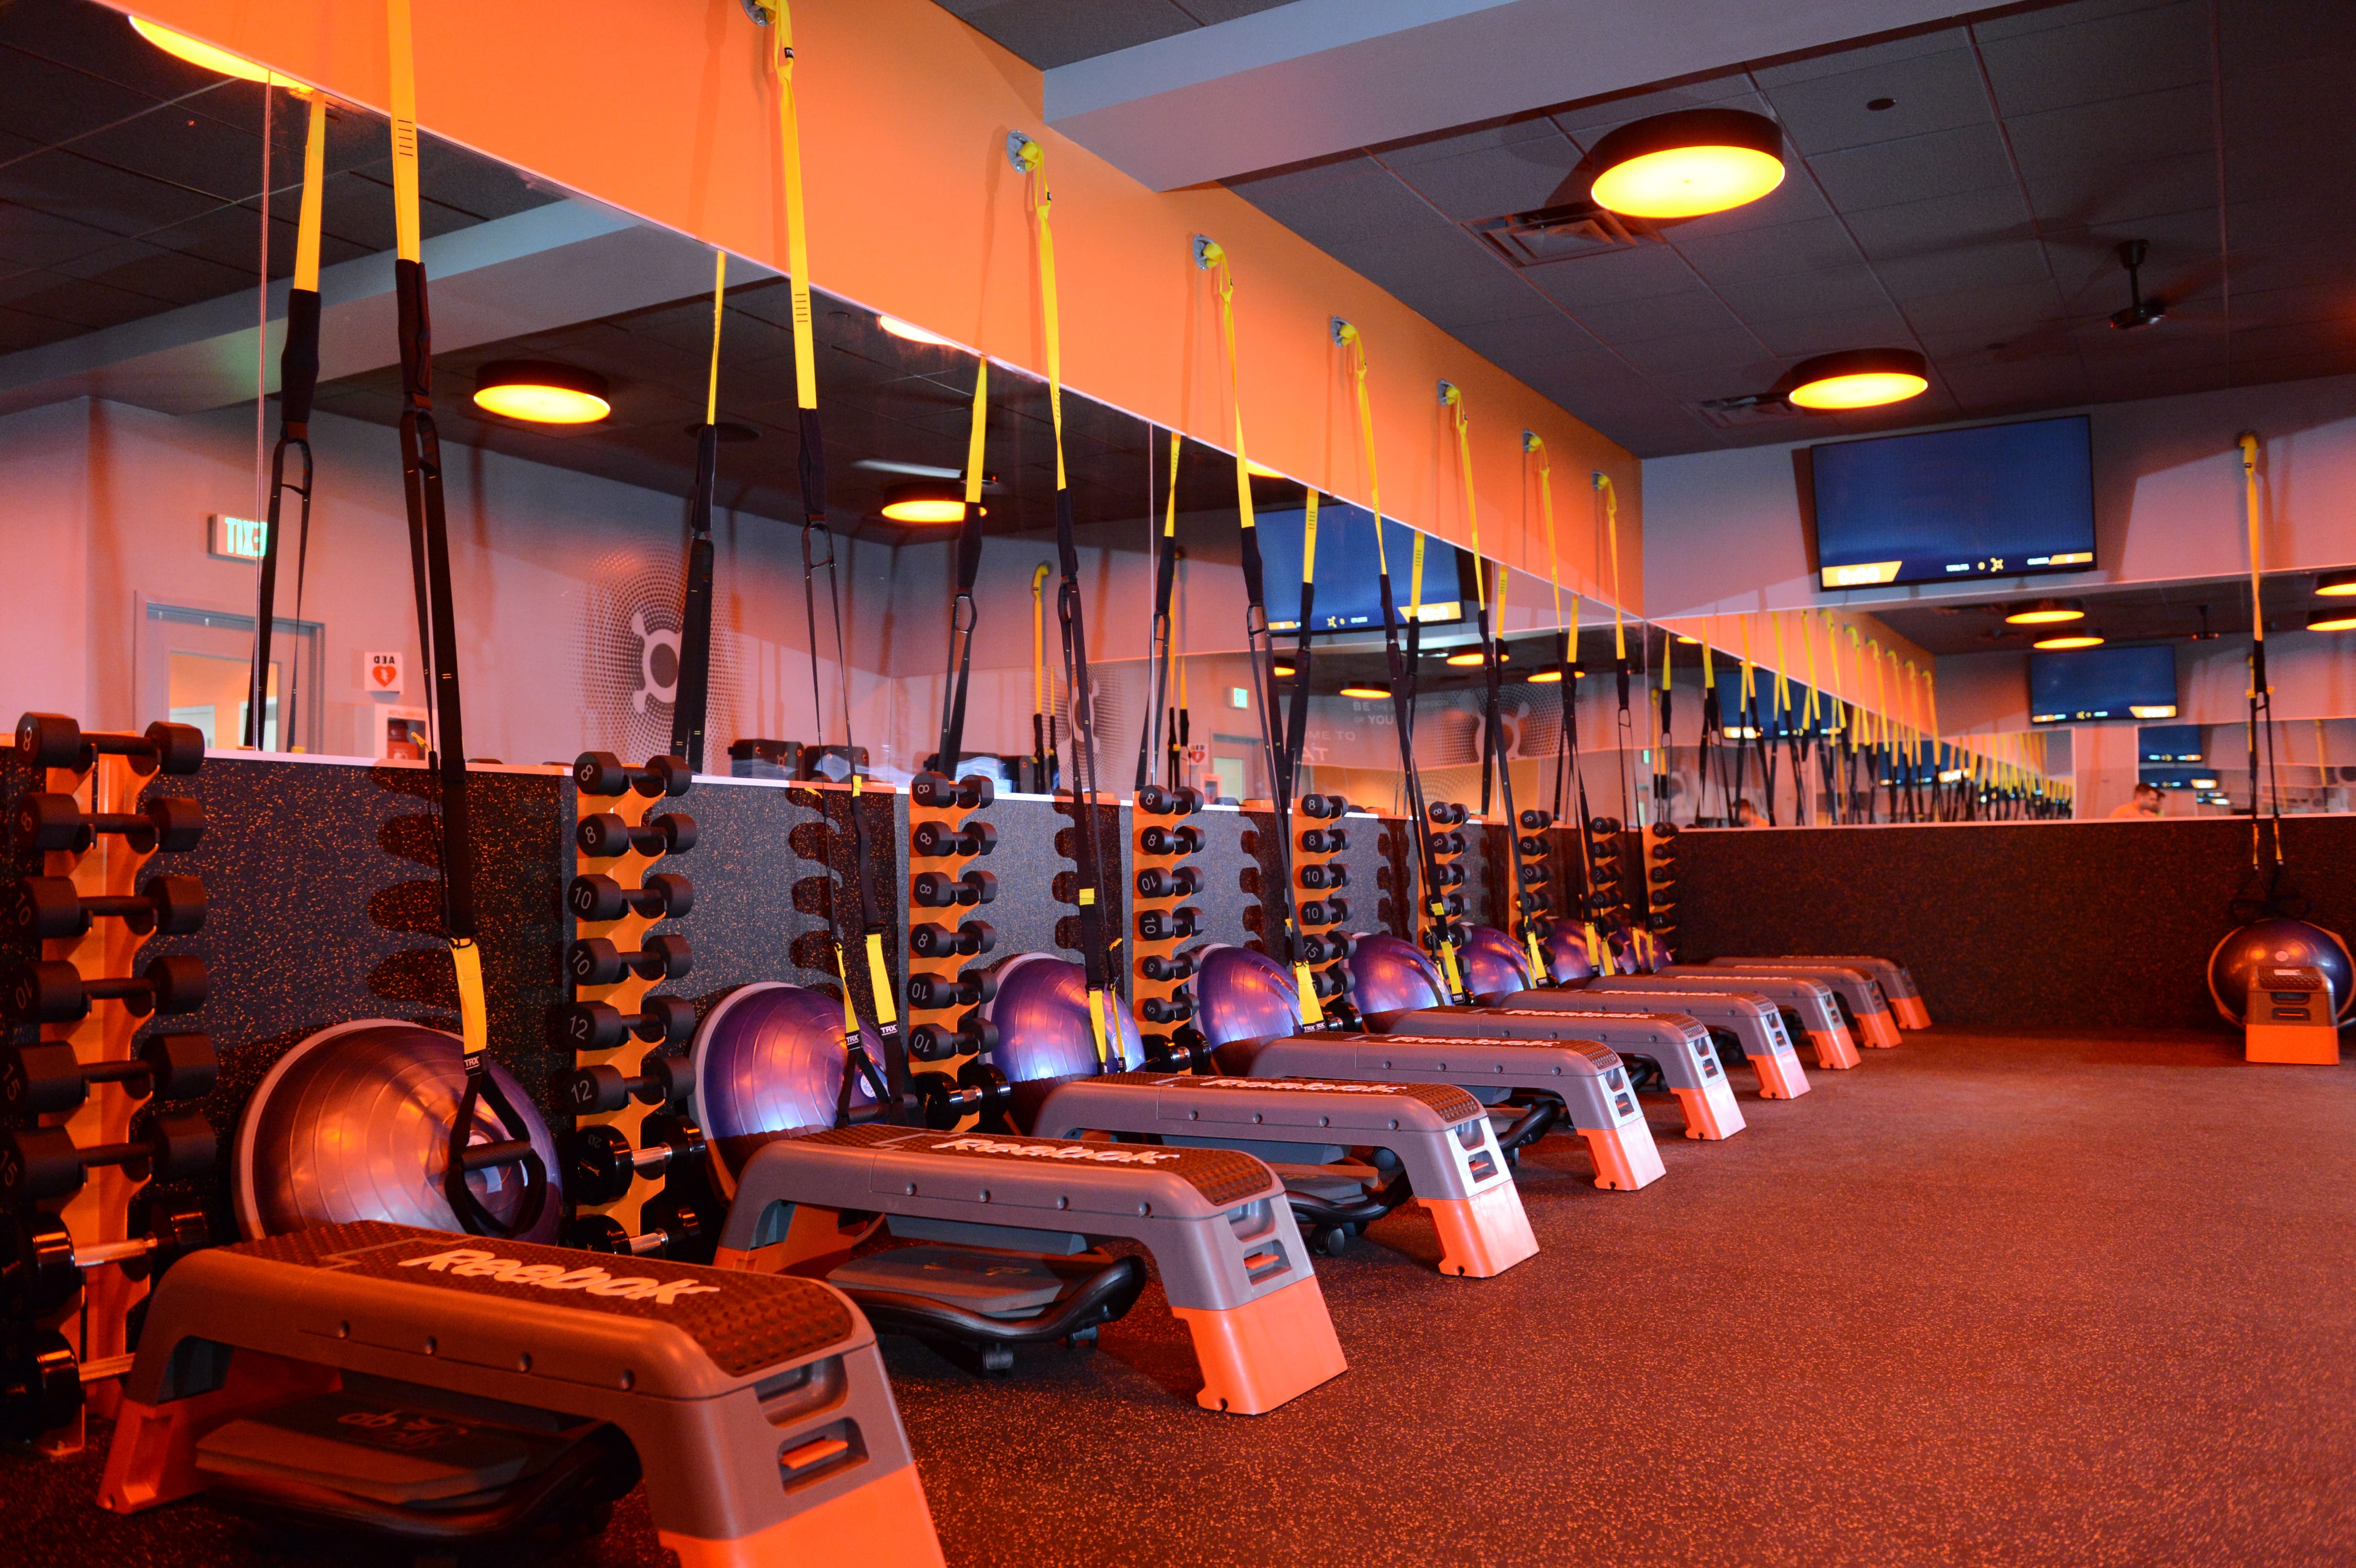 Heart Rate Workout Is a HIIT at Orangetheory Fitness